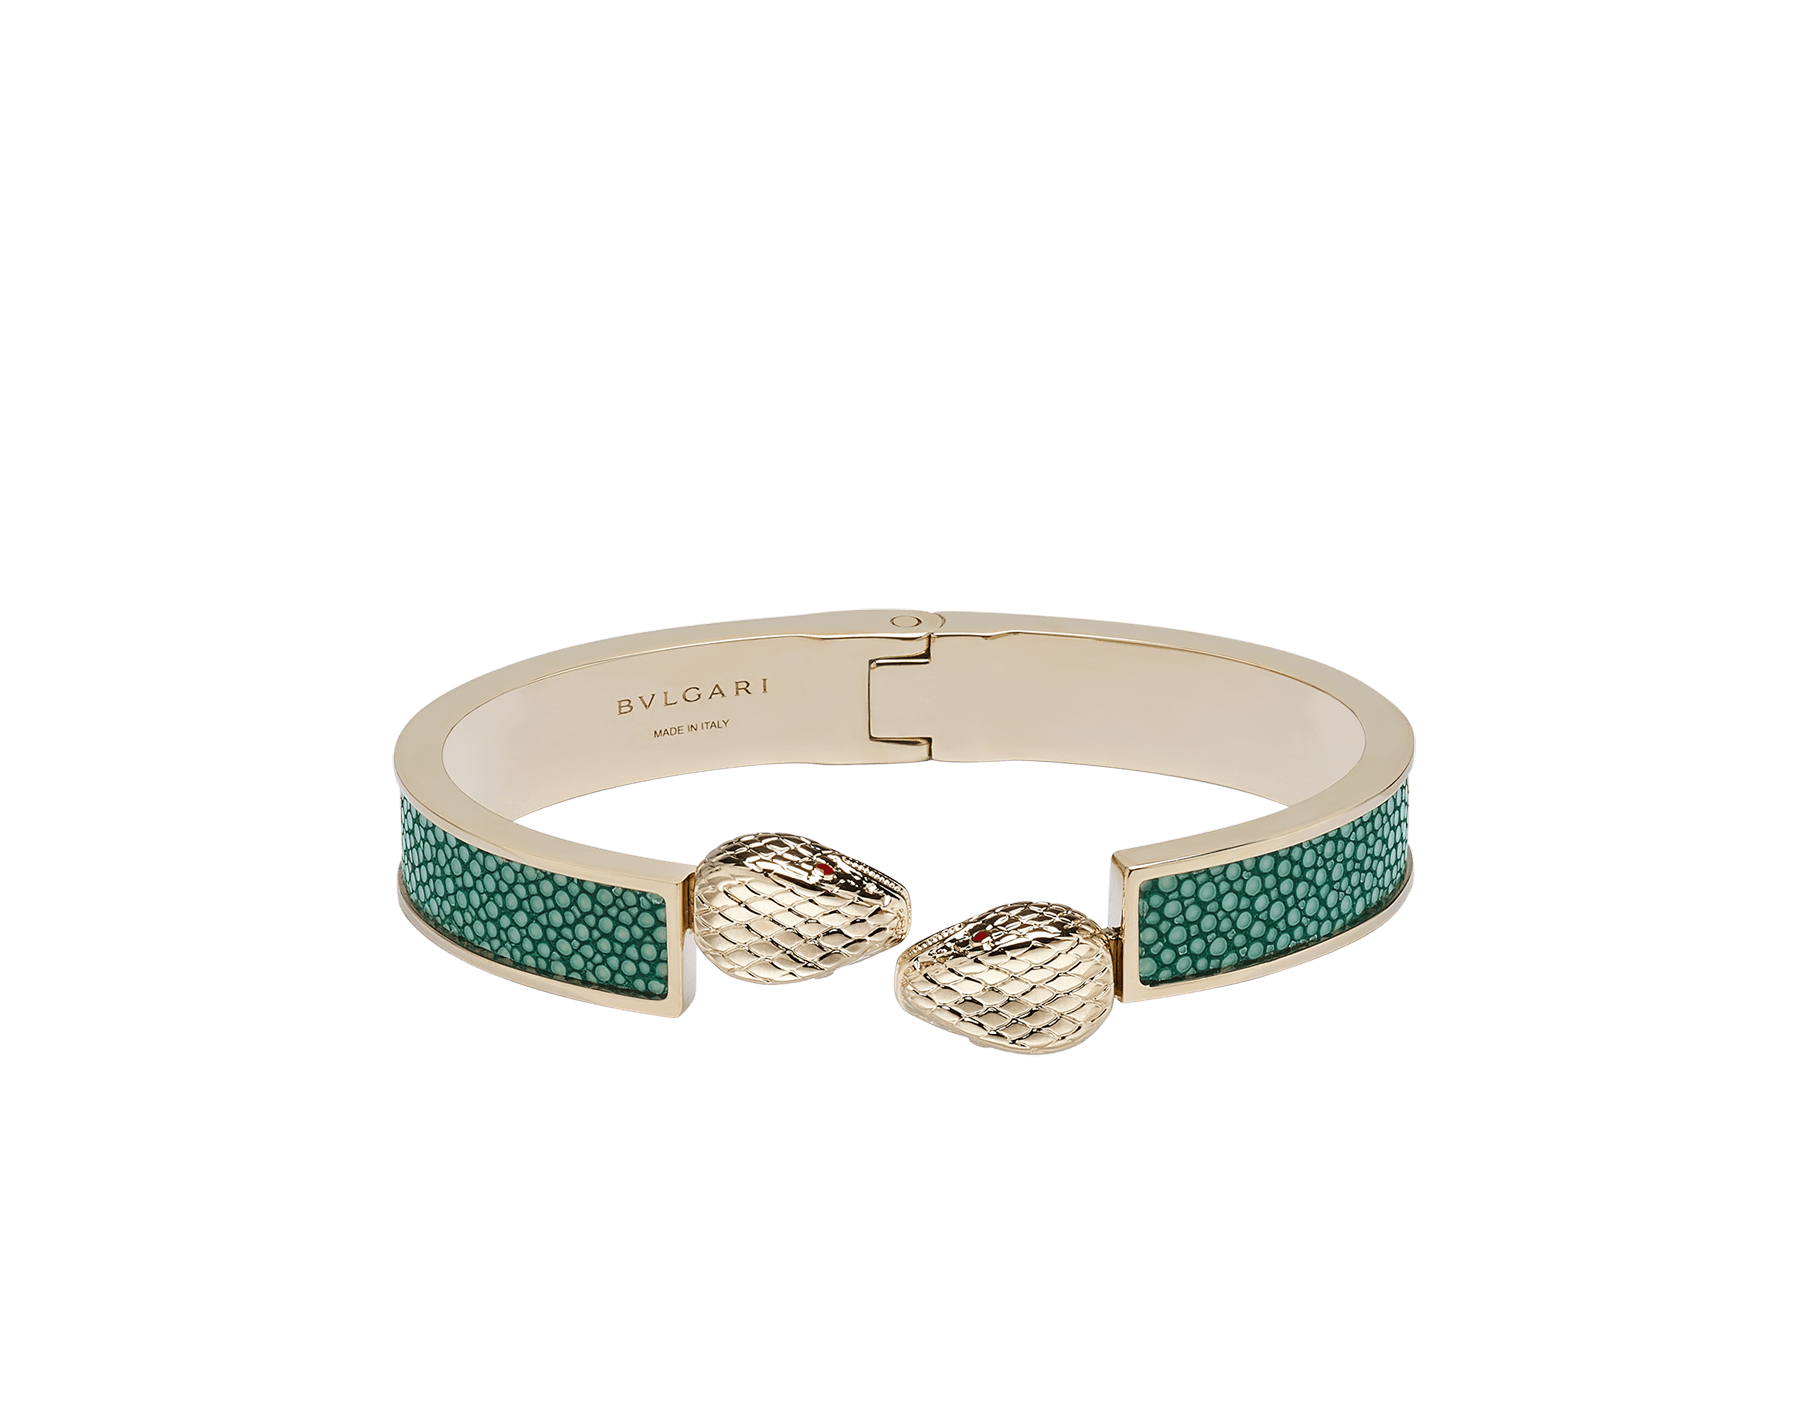 Serpenti Forever bangle bracelet in light gold-plated brass with soft emerald green galuchat skin inserts. Captivating double snakehead hinge closure in light gold-plated brass embellished with red enamel eyes. SERPHINGE-LMCL-SG image 1